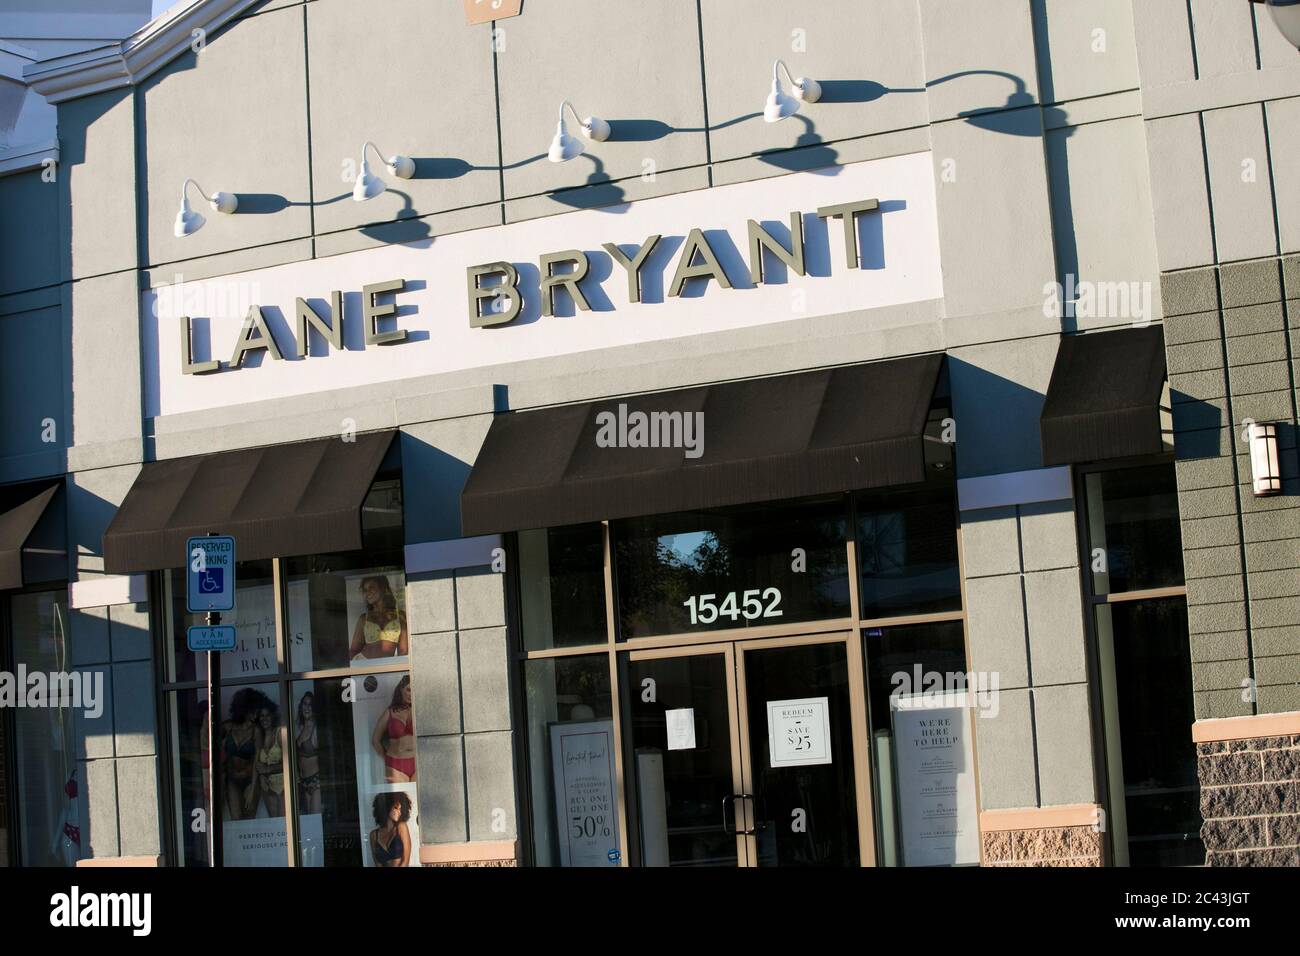 A logo sign outside of a Lane Bryant retail store location in Bowie, Maryland on June 8, 2020. Stock Photo